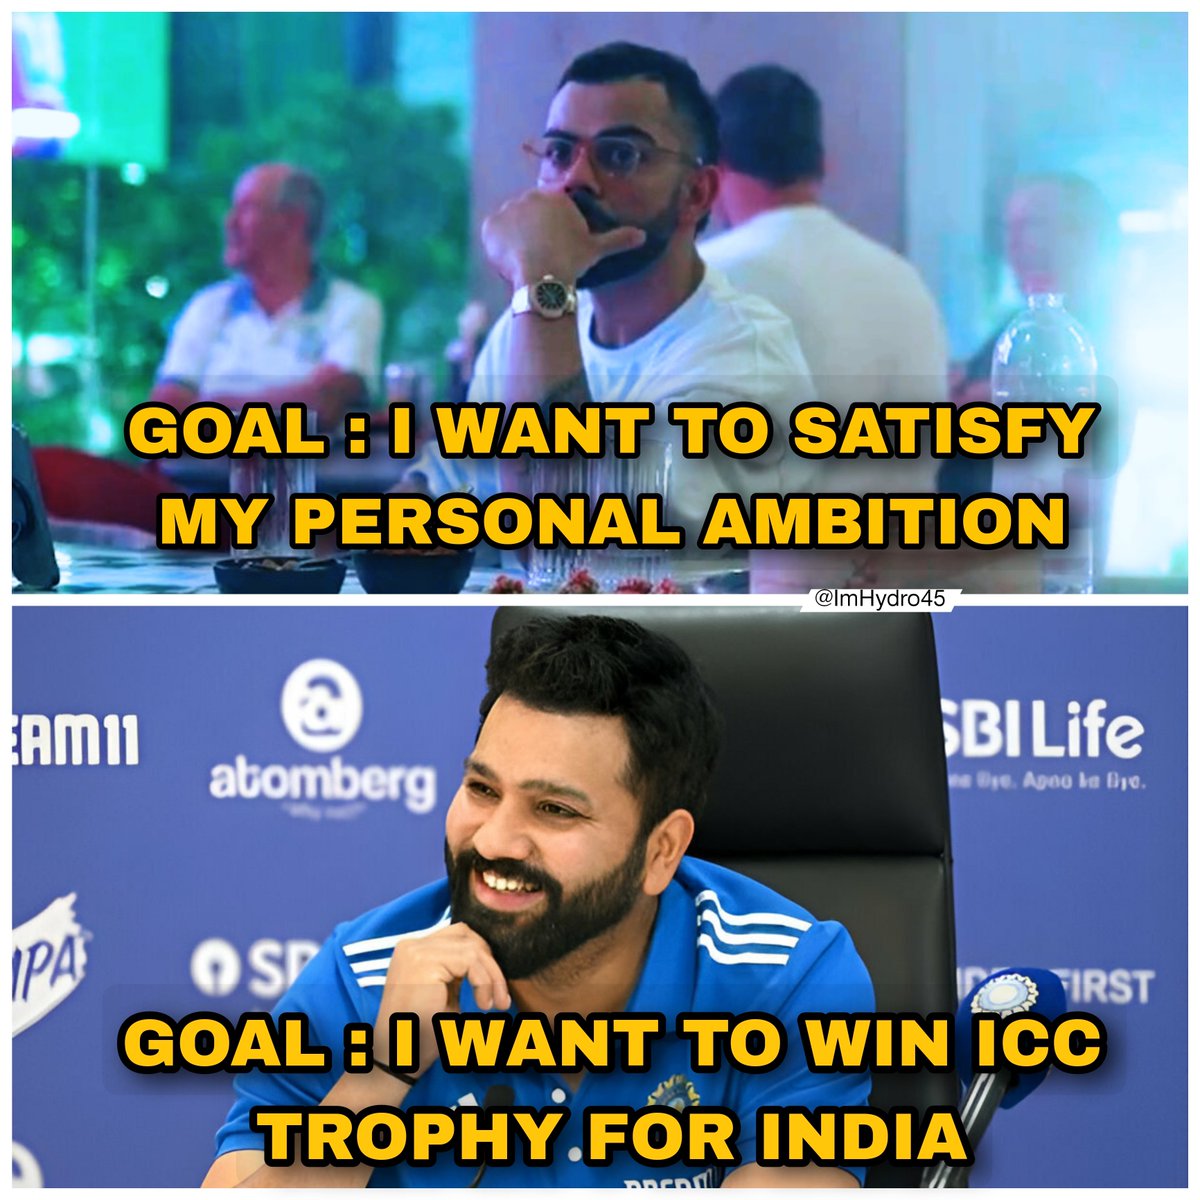 Never seen Chokli talking about winning ICC trophies for India like Rohit Sharma. 

Different Goals, Different levels ! 🙂💔